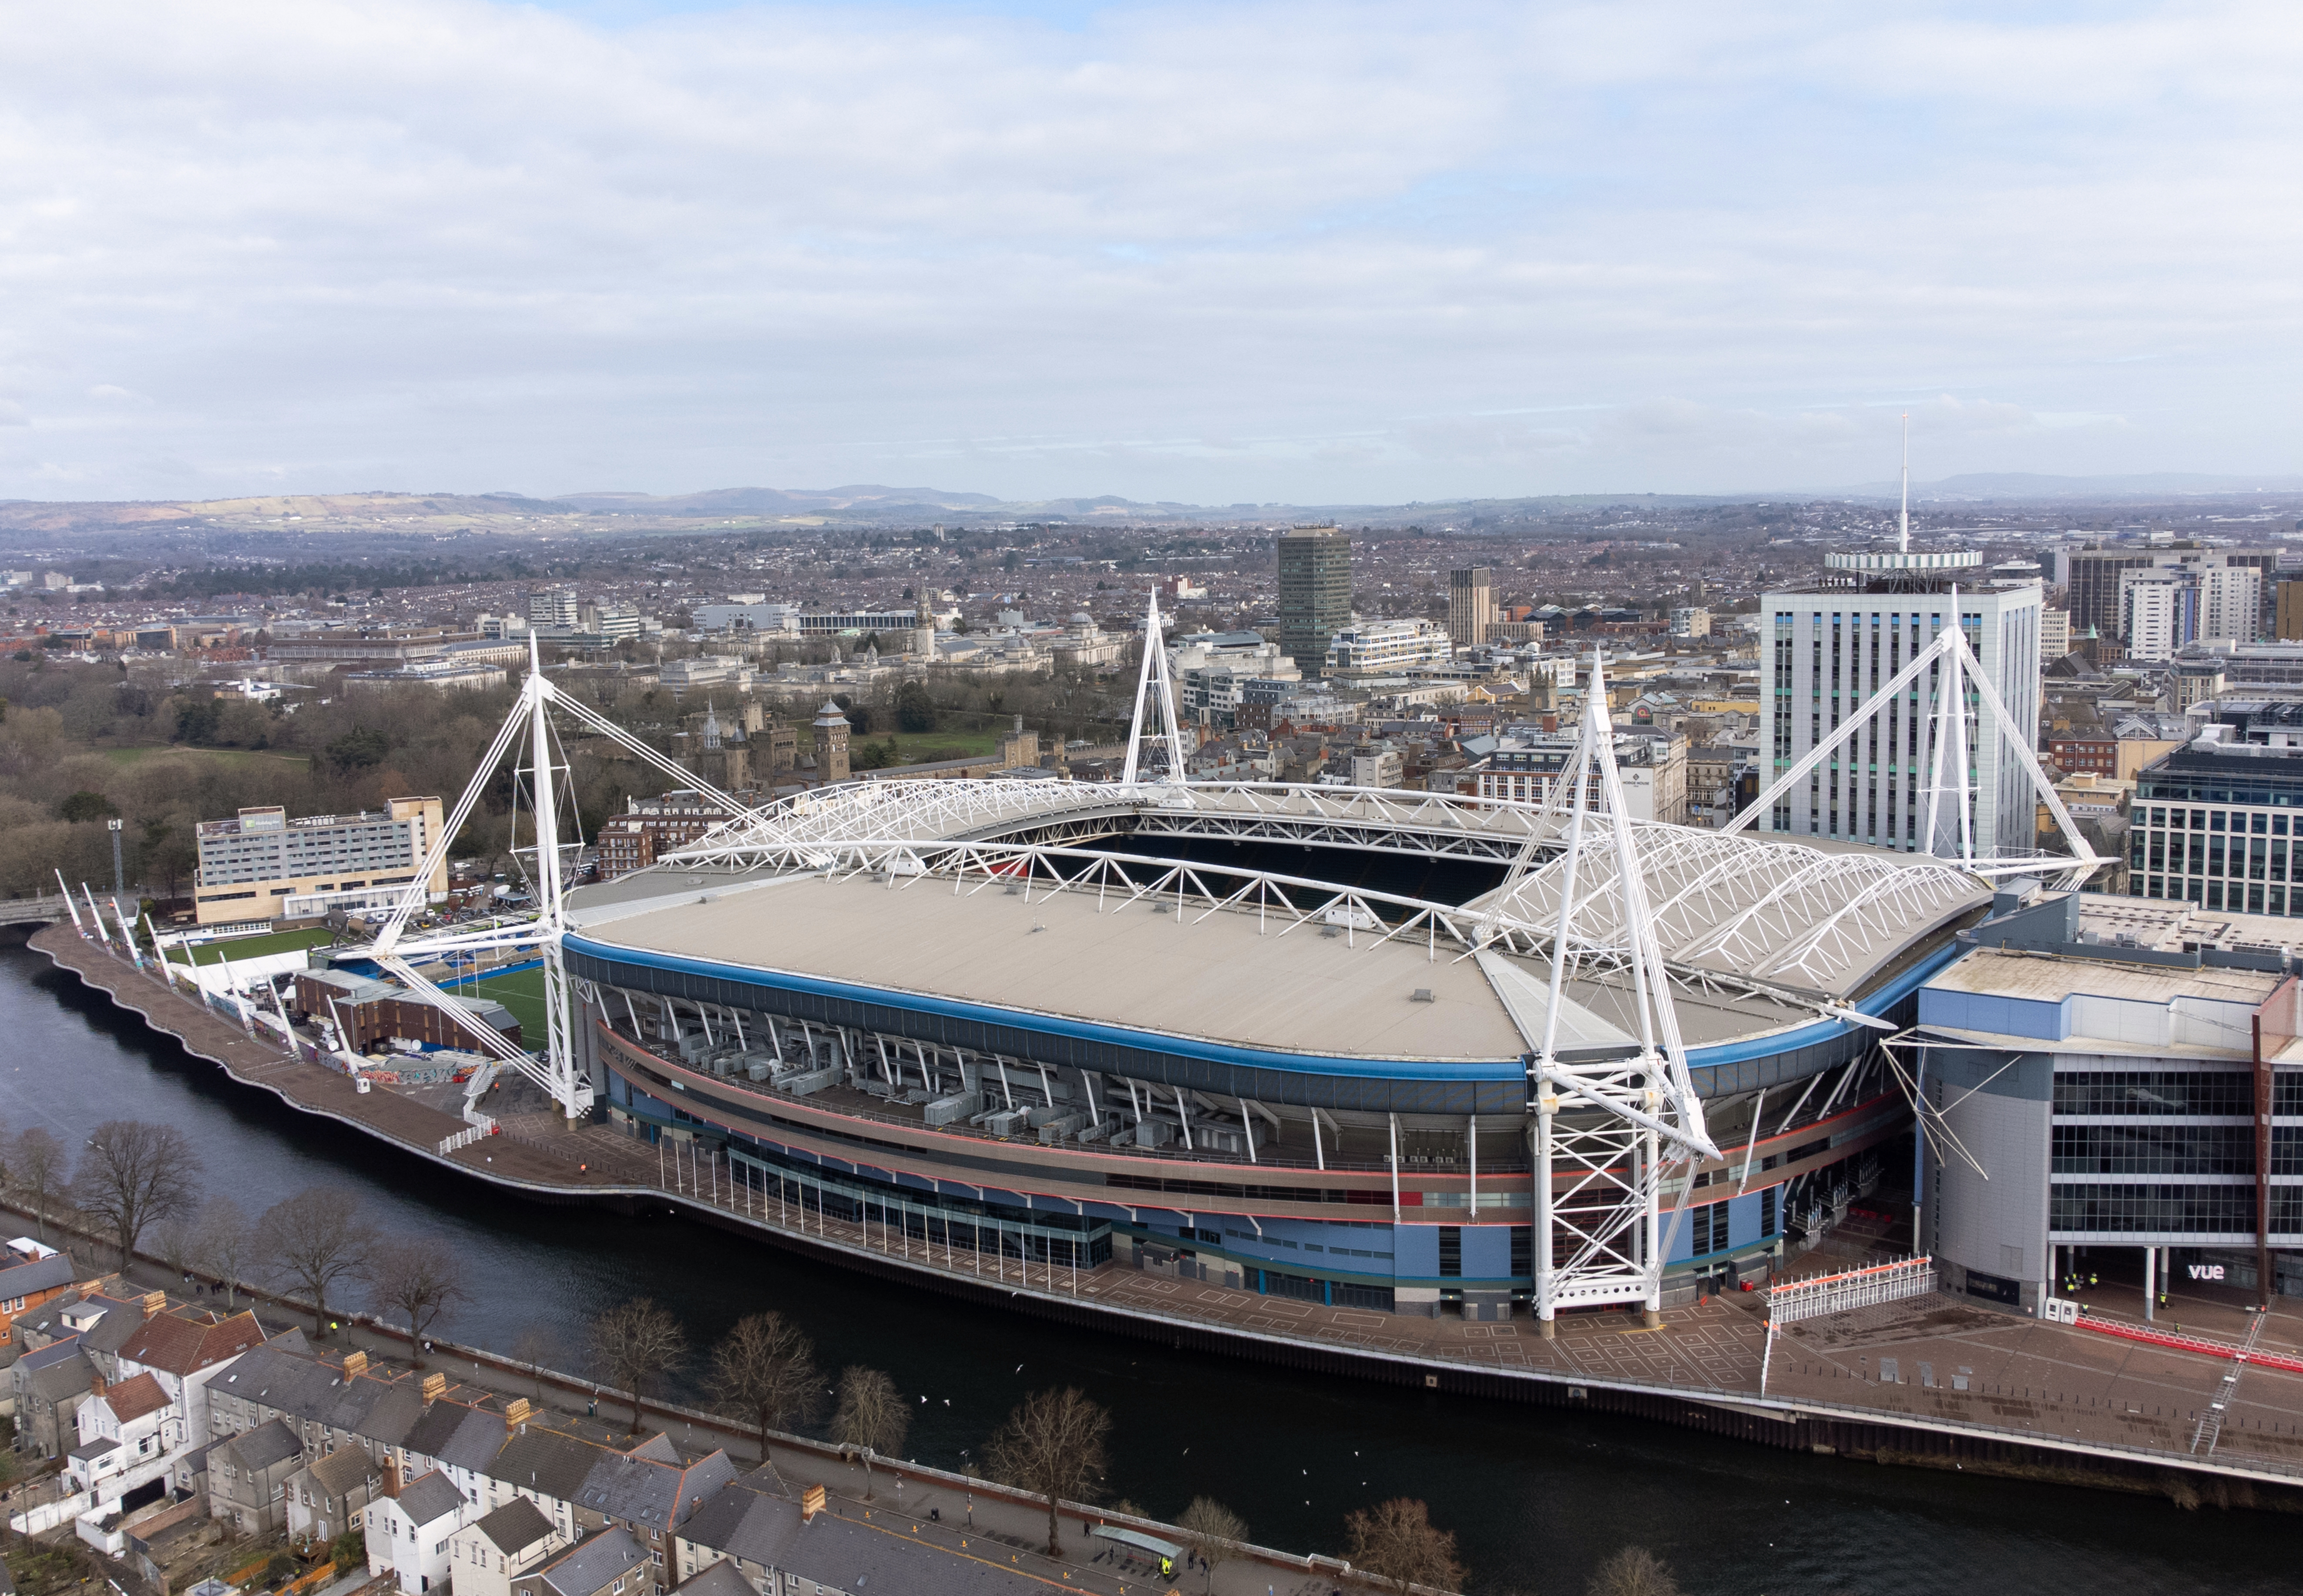 The Principality Stadium could host the opening match of Euro 2028